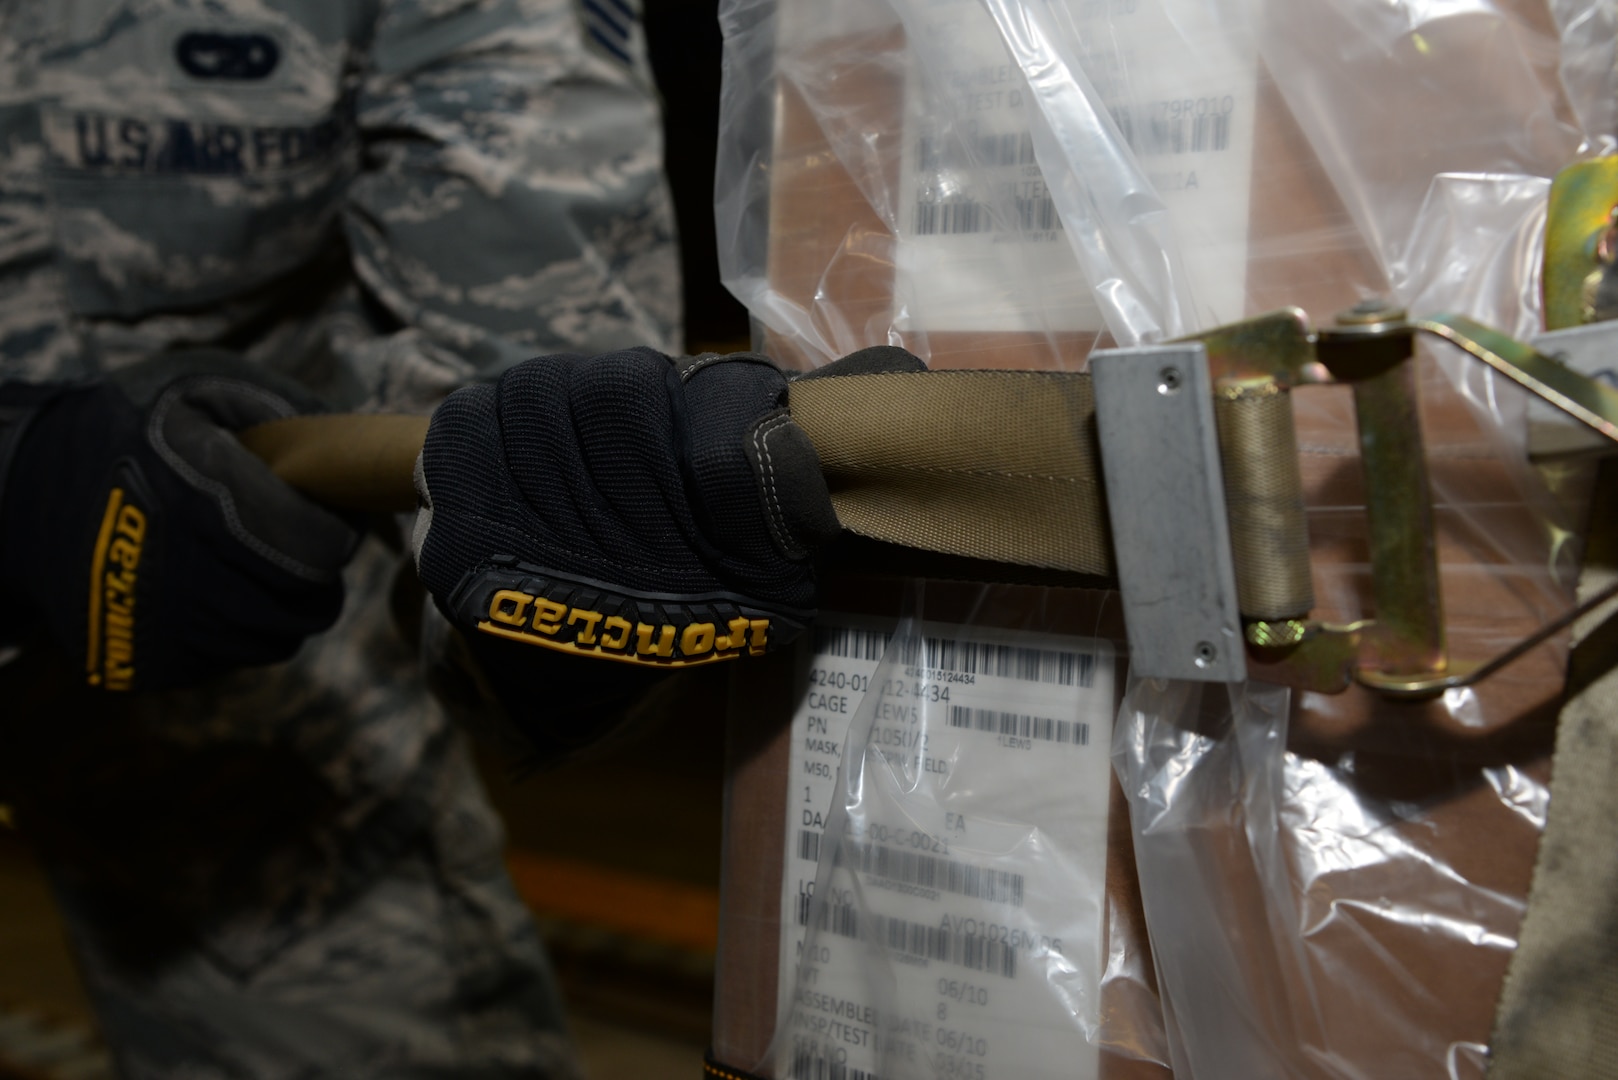 A member of the 436th Aerial Port Squadron cinches a strap on a pallet during a Civil Reserve Air Fleet readiness exercise Nov. 13, 2017, inside the individual protective equipment warehouse on Dover Air Force Base, Del. Members of the 436th APS strapped down the pallets of IPE gear and transported it to a staging area to prepare for flight. (U.S. Air Force photo by Staff Sgt. Aaron J. Jenne)